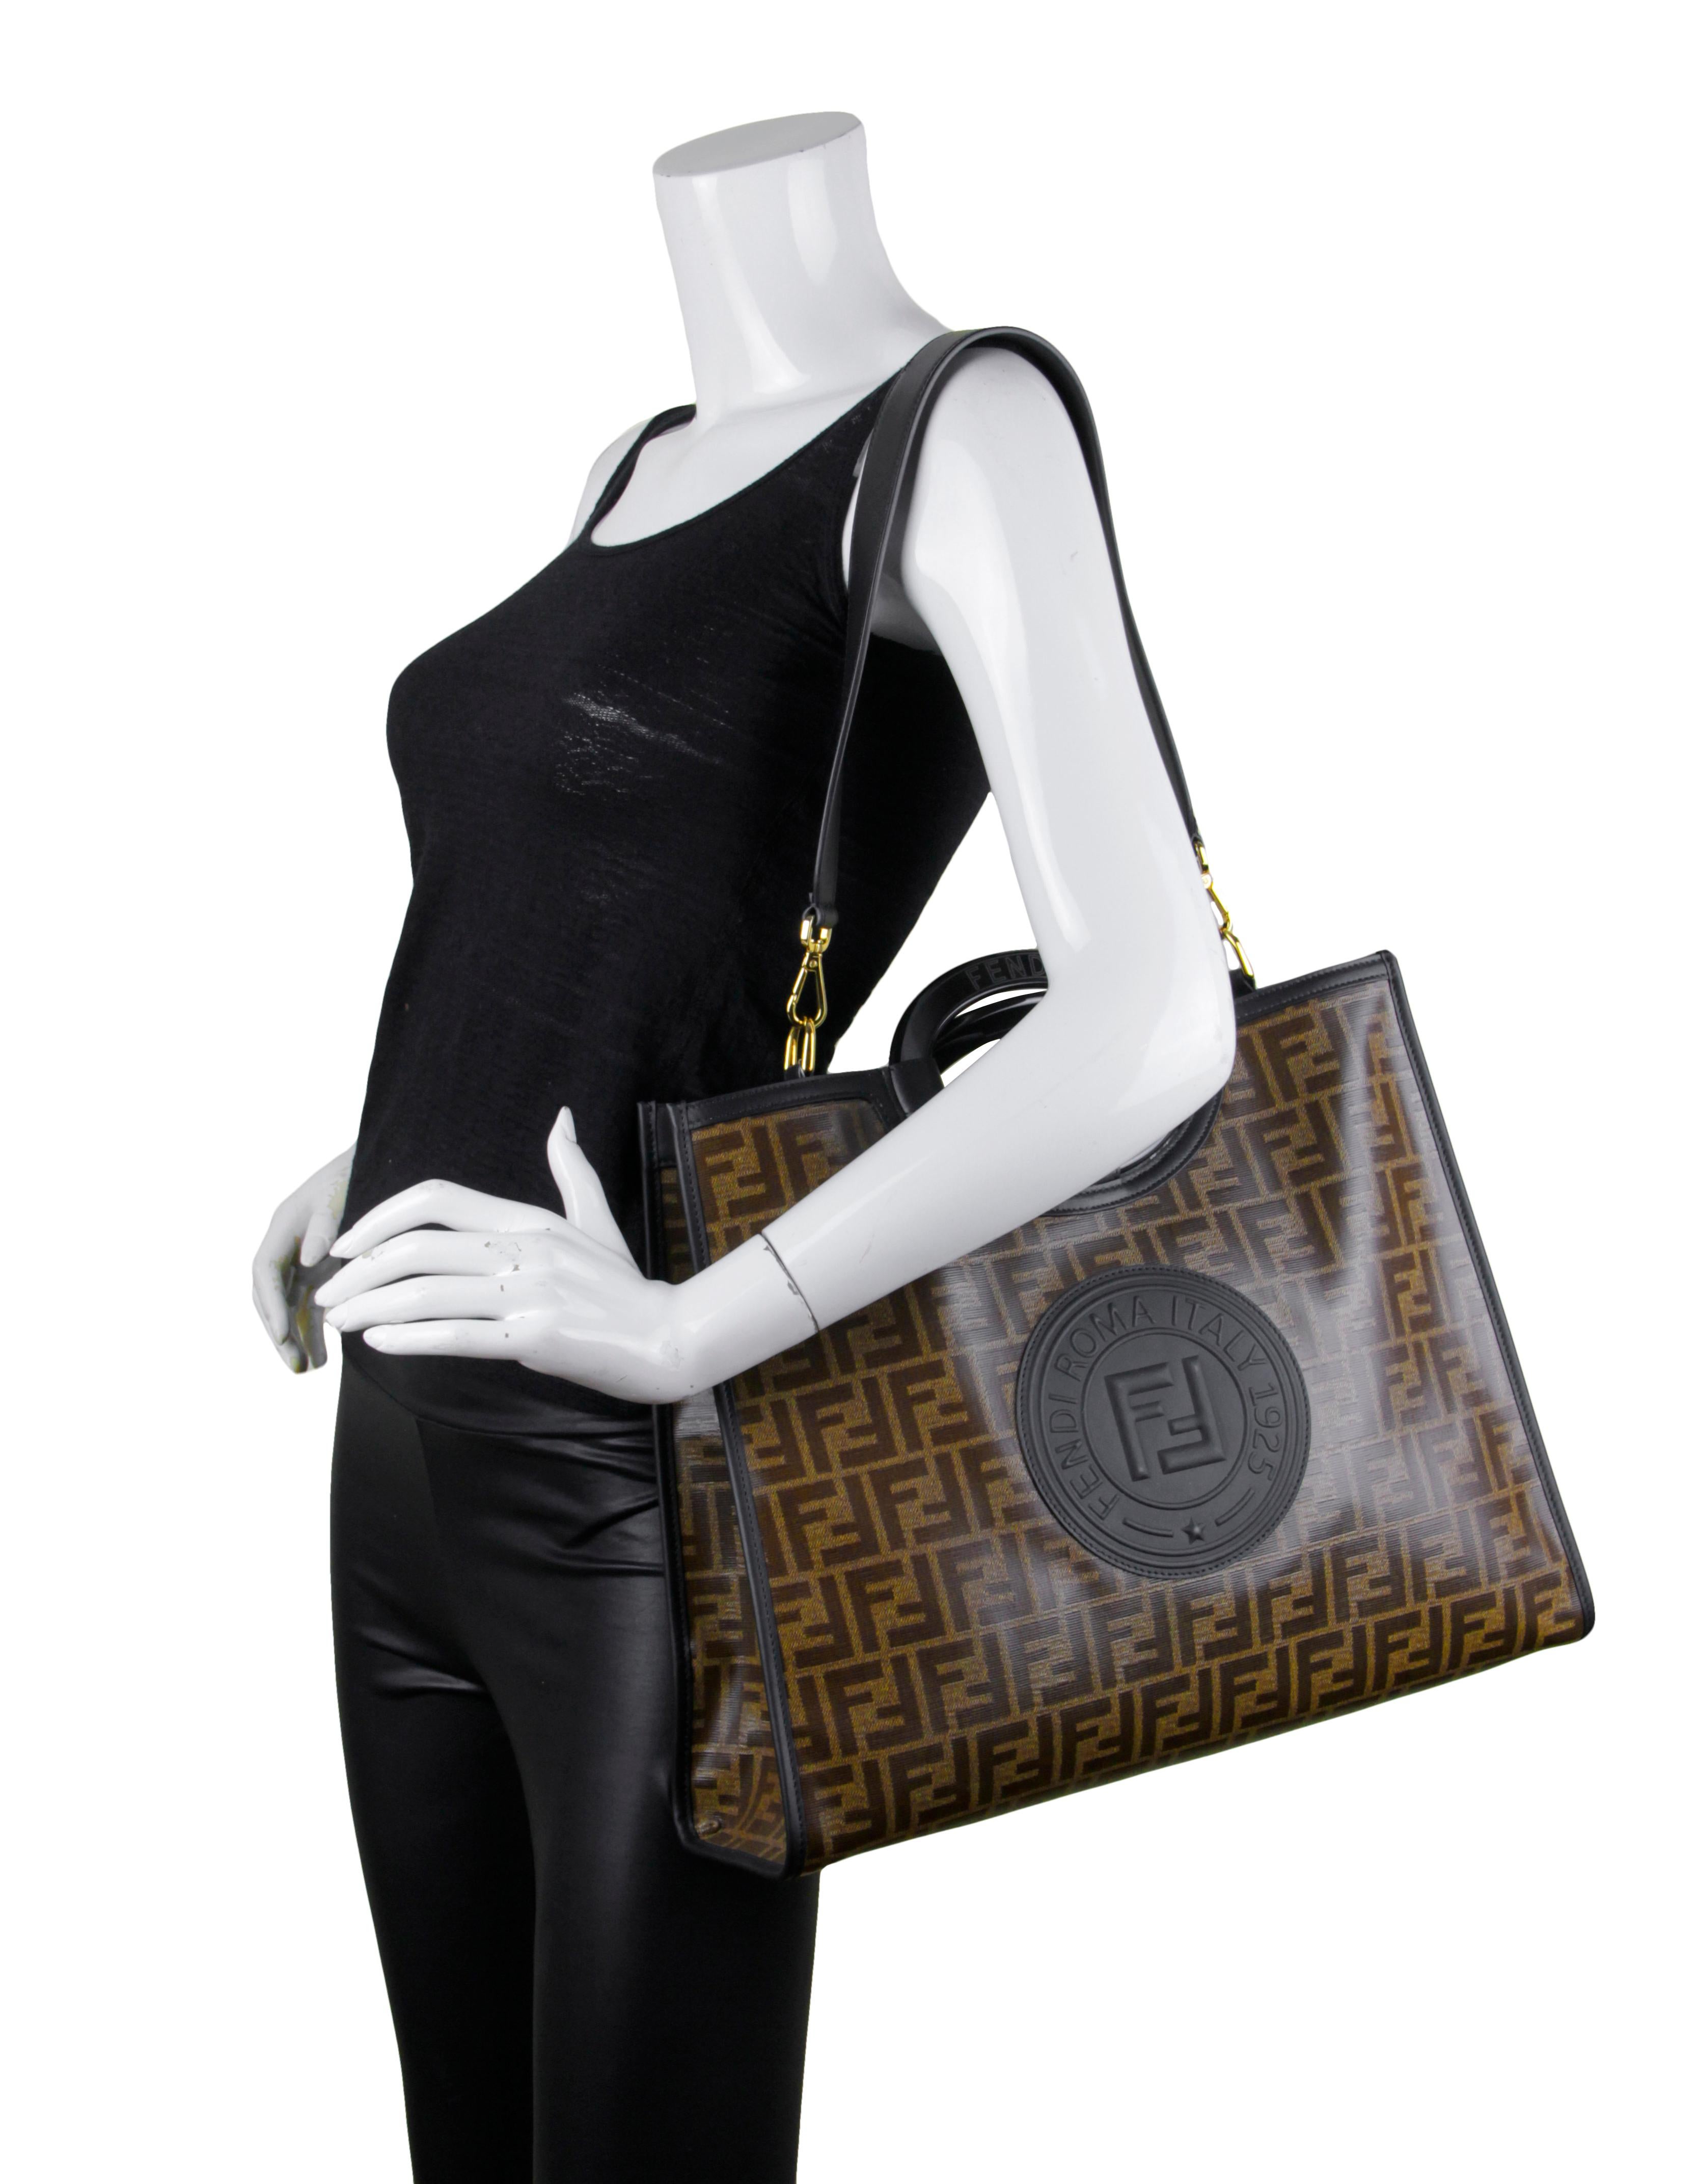 Fendi Mogano Panna Black Glazed Fabric Monogram FF 1974 Stamp Patch Medium Runaway Shopper Tote

Made In: Italy
Color: Brown and black
Hardware: Goldtone
Materials: Glazed fabric and resin with leather strap 
Closure/Opening: Open top
Interior